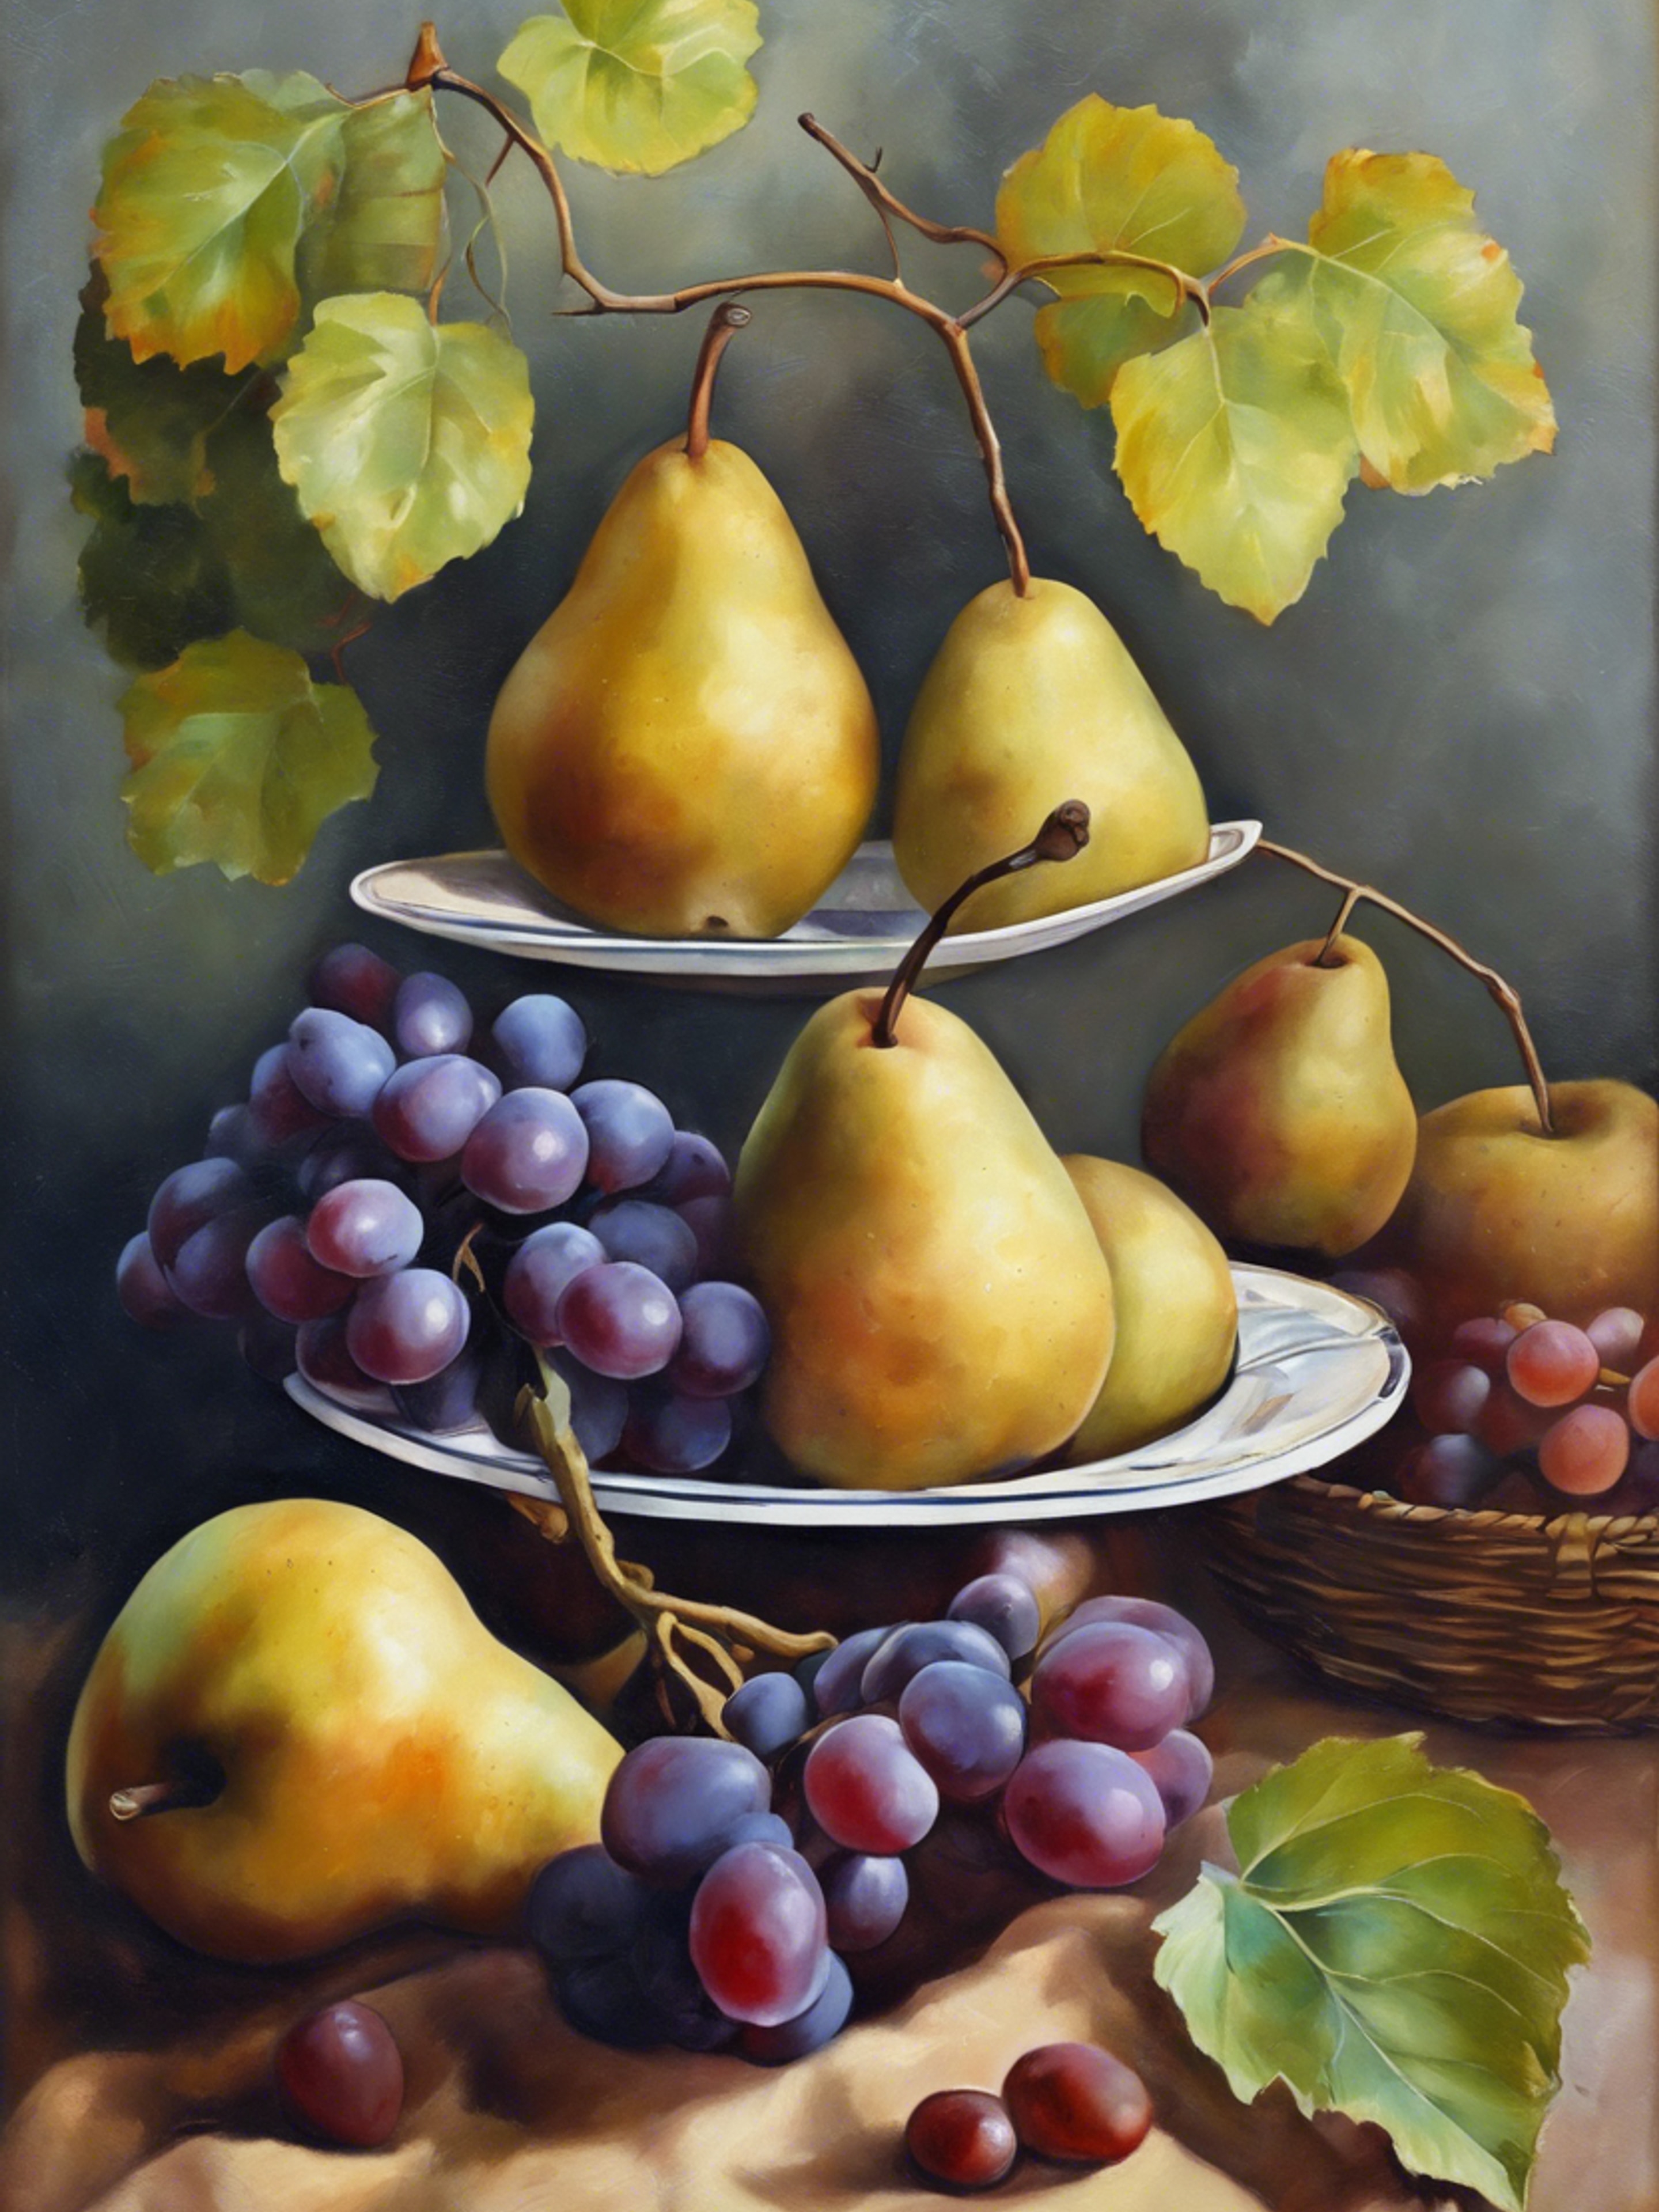 A vintage oil painting showcasing a still life of pears and grapes. วอลล์เปเปอร์[9e556c34ce824a50b67f]